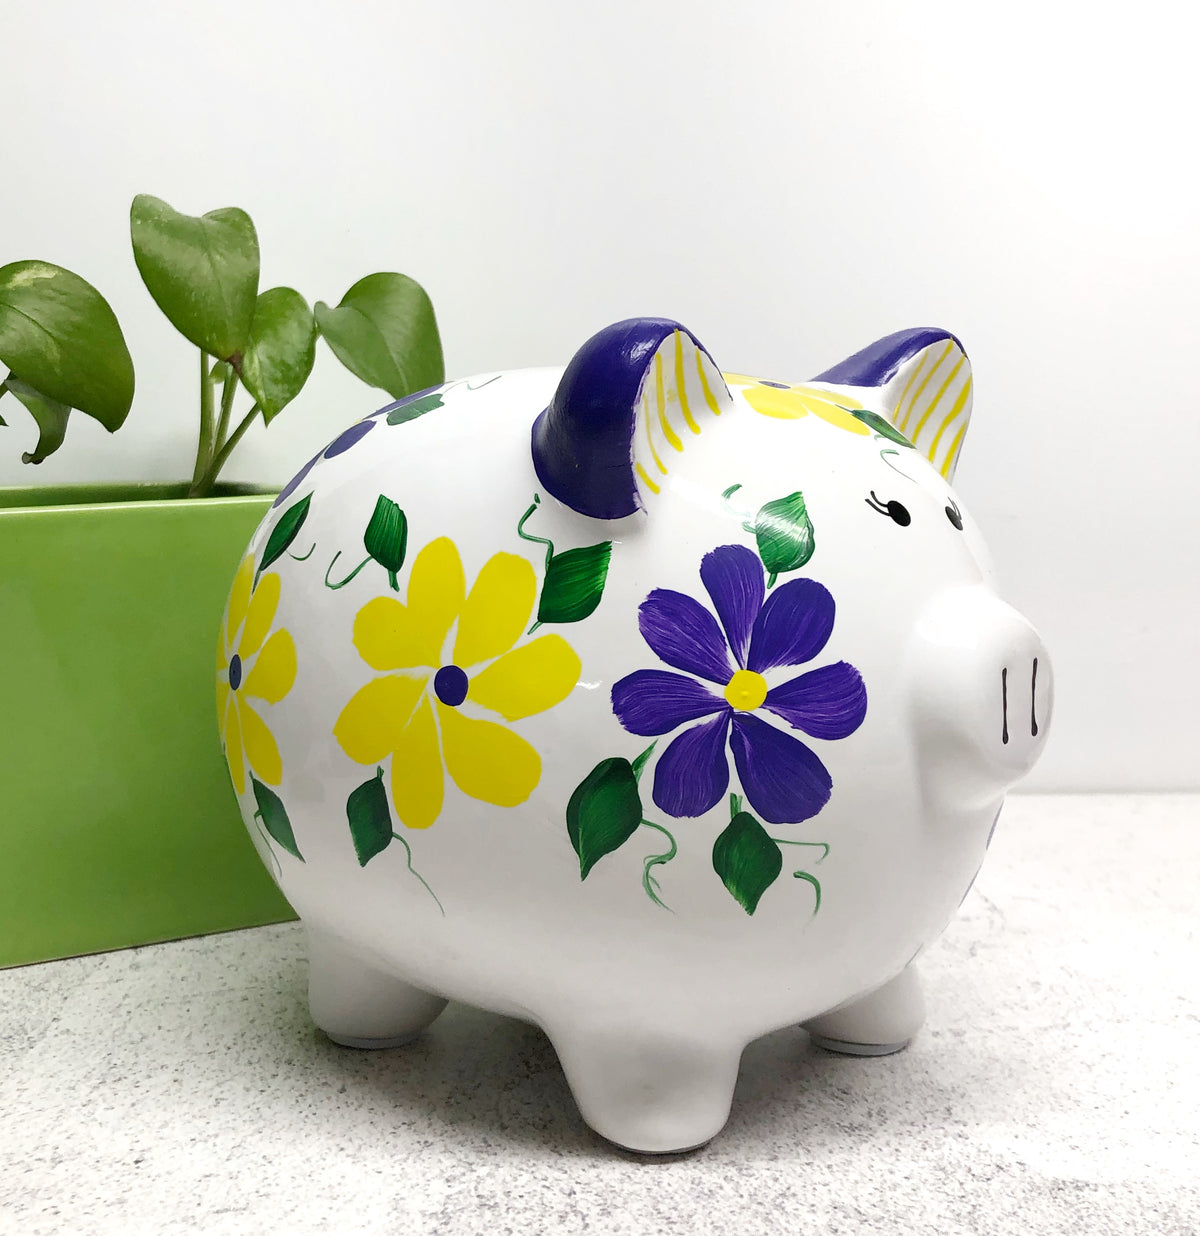 Personalized Painted Piggy Bank